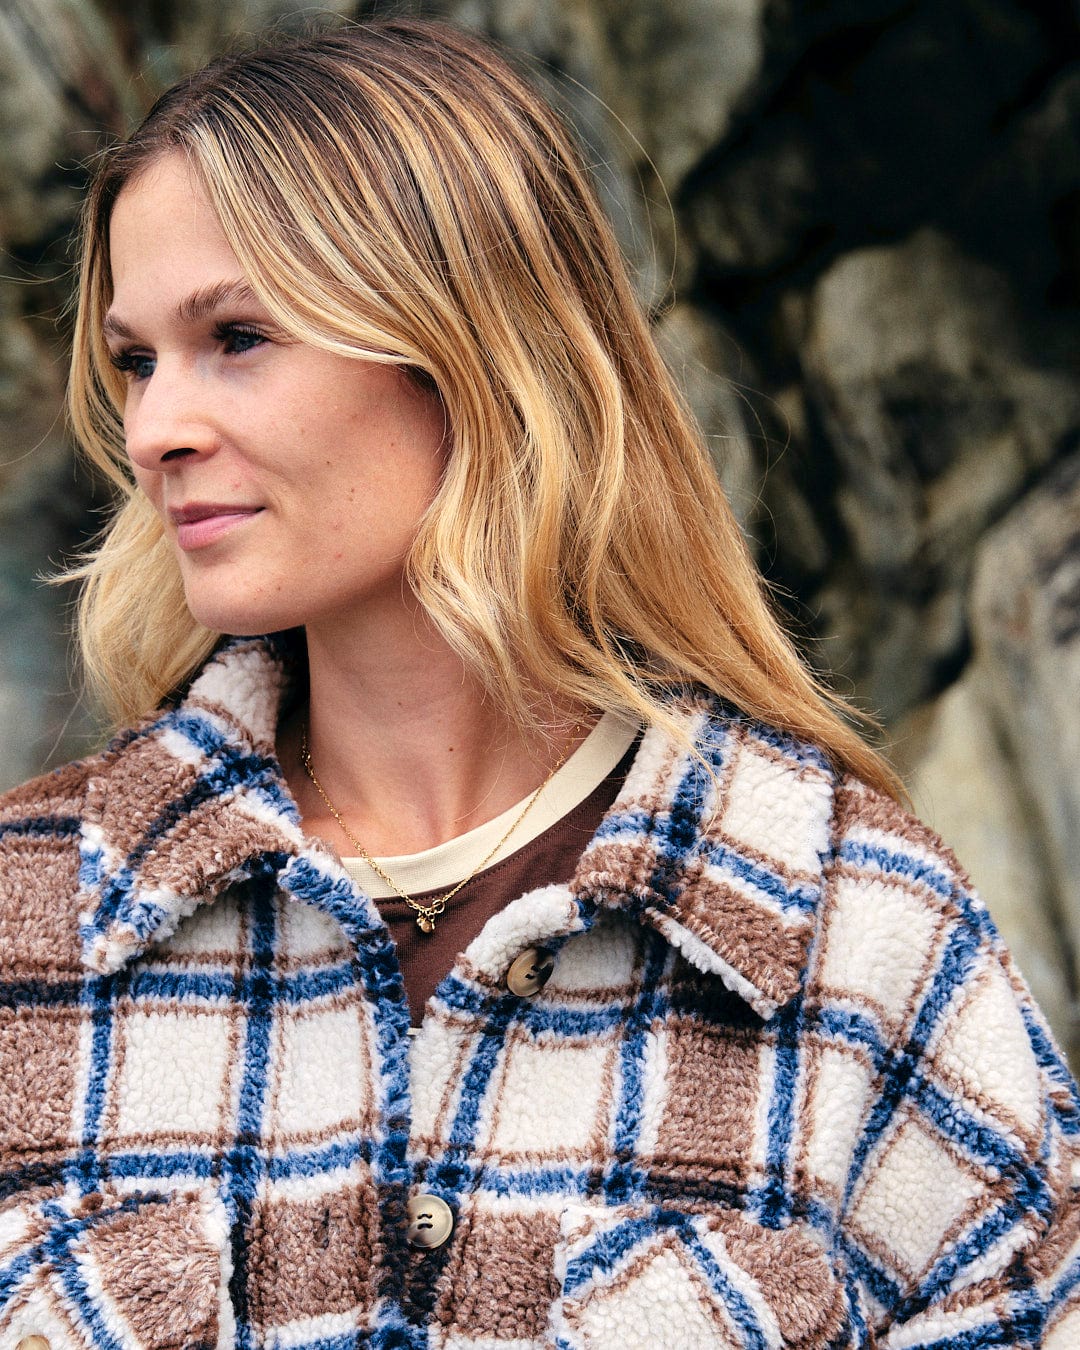 A woman in a Saltrock Laurie - Womens Check Sherpa Fleece Coat - Cream standing in front of rocks.